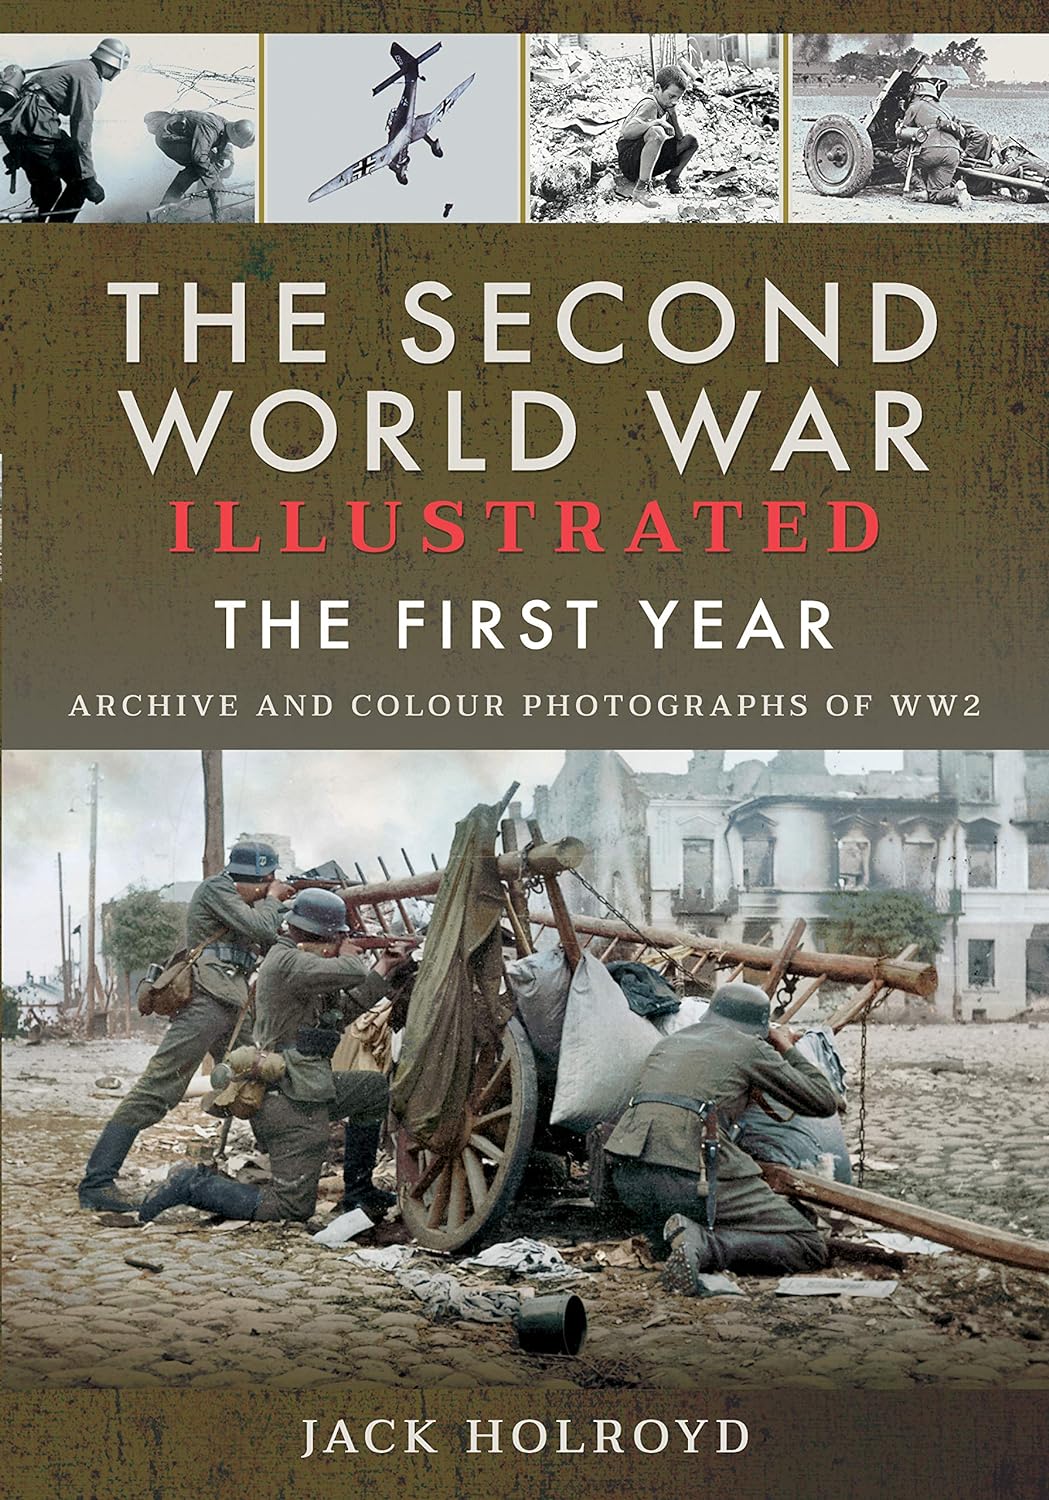 The Second World War Illustrated : The First Year: September 1939 - September 1940